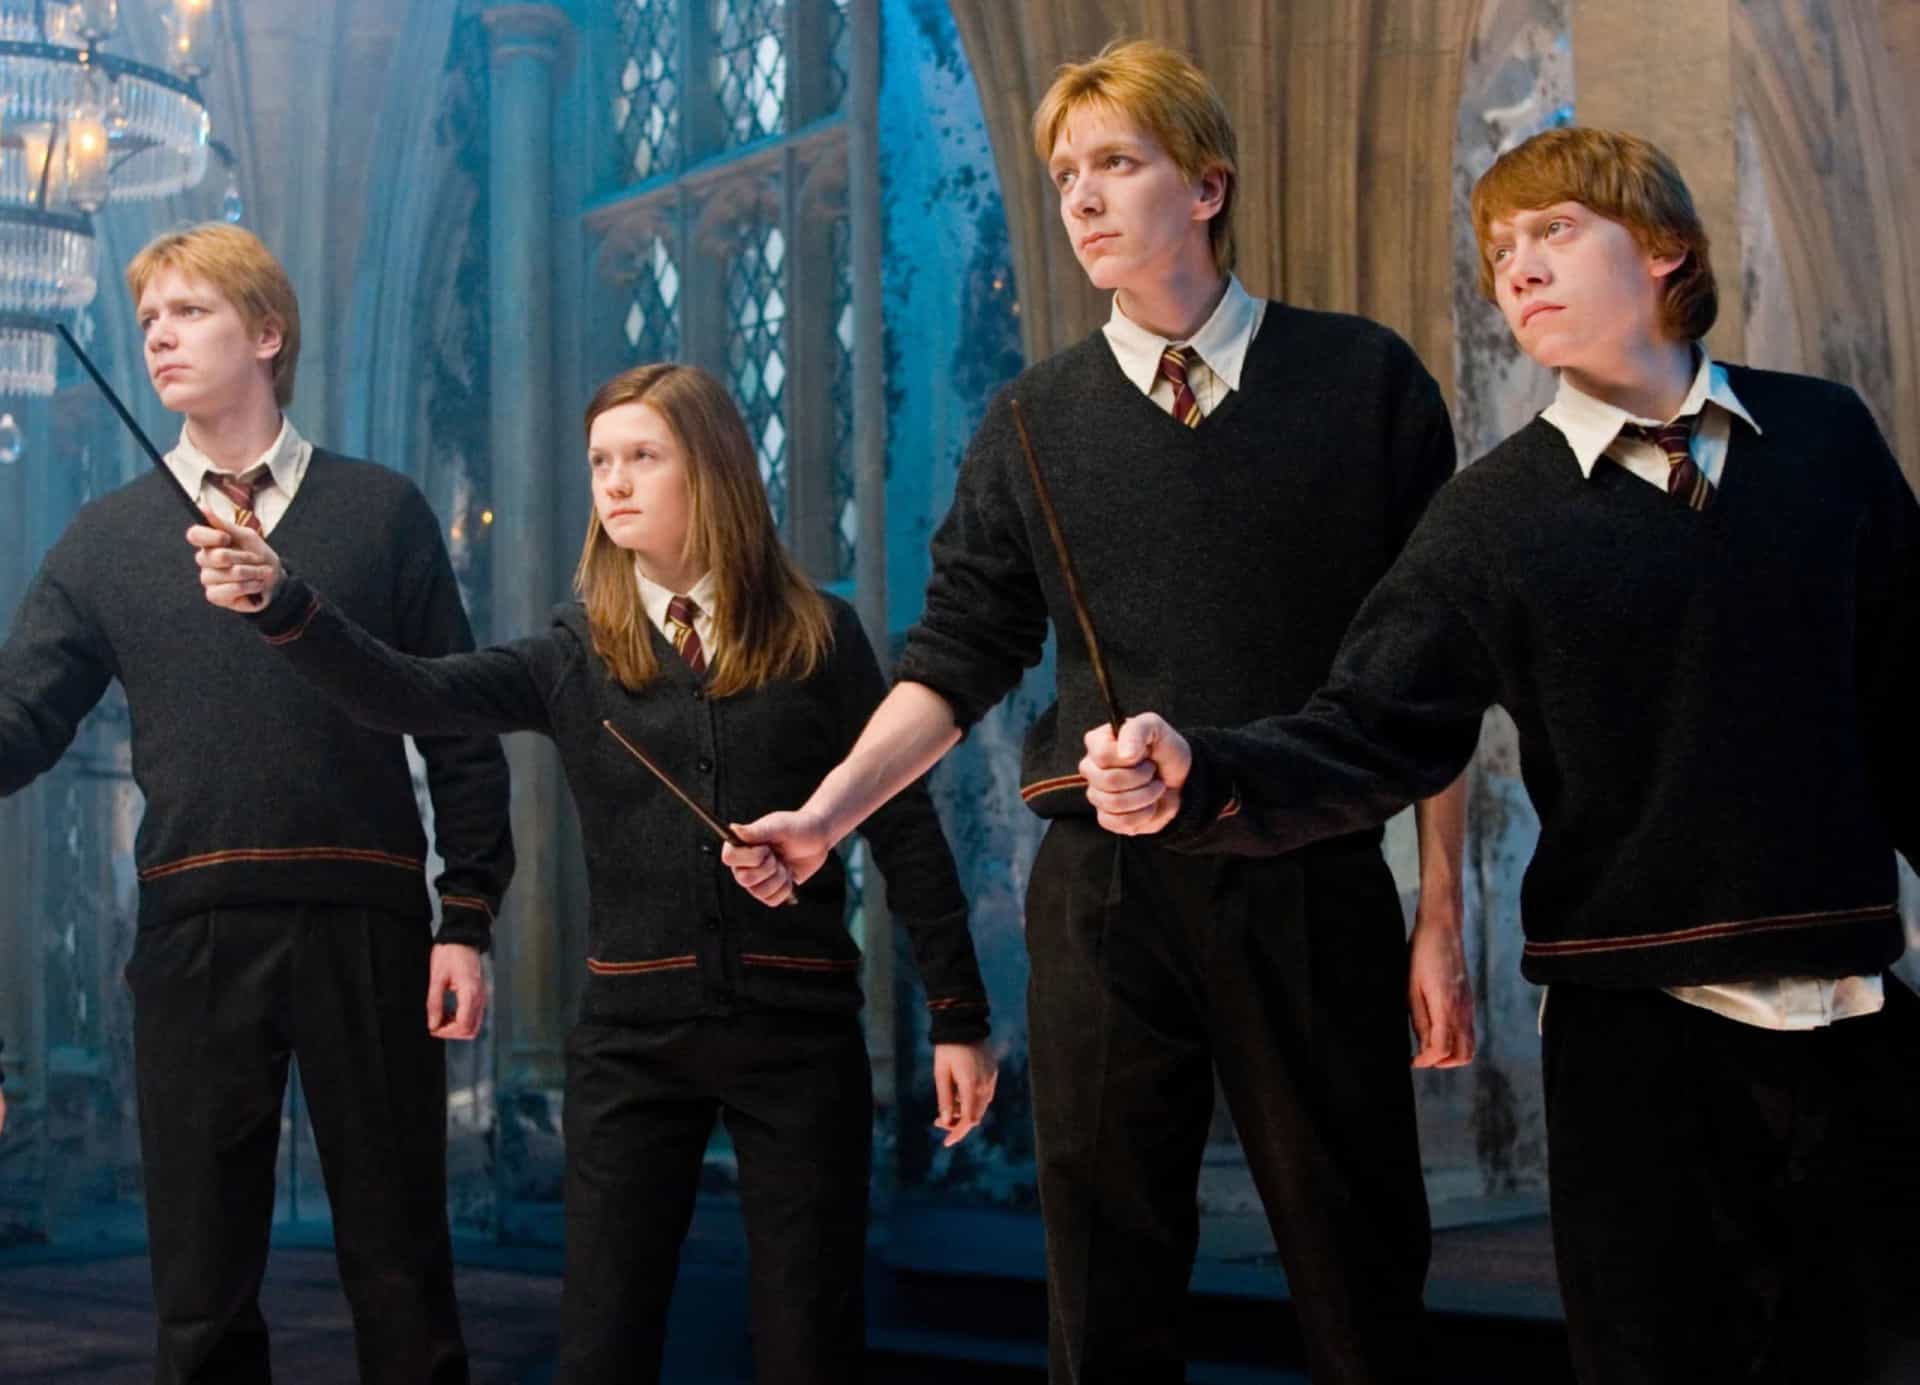 <p>Real-life twins James and Oliver Phelps playing Fred and George Weasley respectively—seen here in 'Harry Potter and the Order of the Phoenix' (2007) with Bonnie Wright and Rupert Grint—was a popular double act throughout the series.</p>